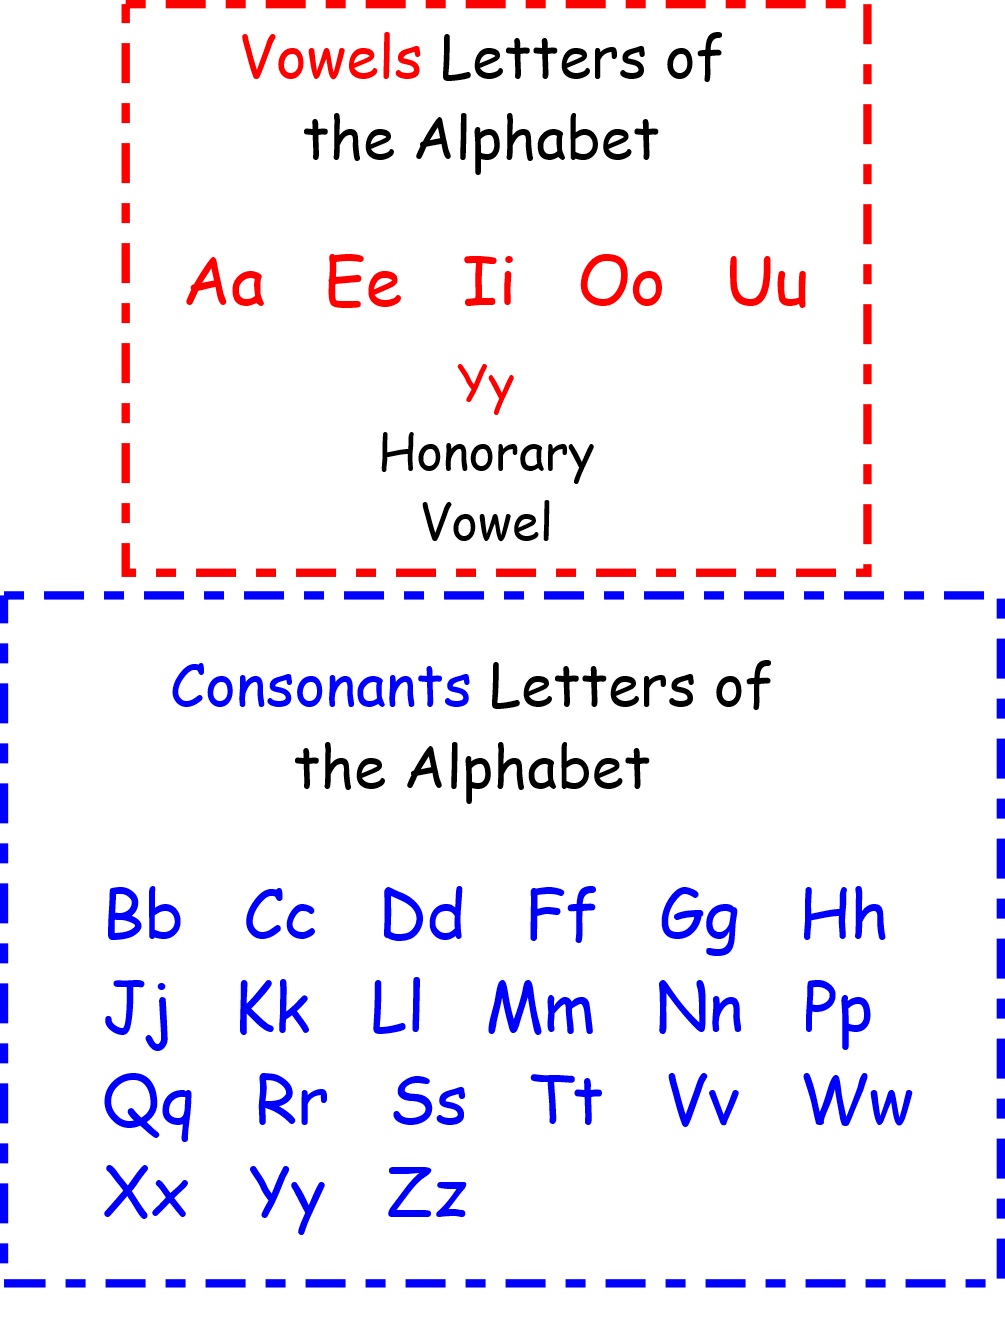 what-are-vowels-and-consonants